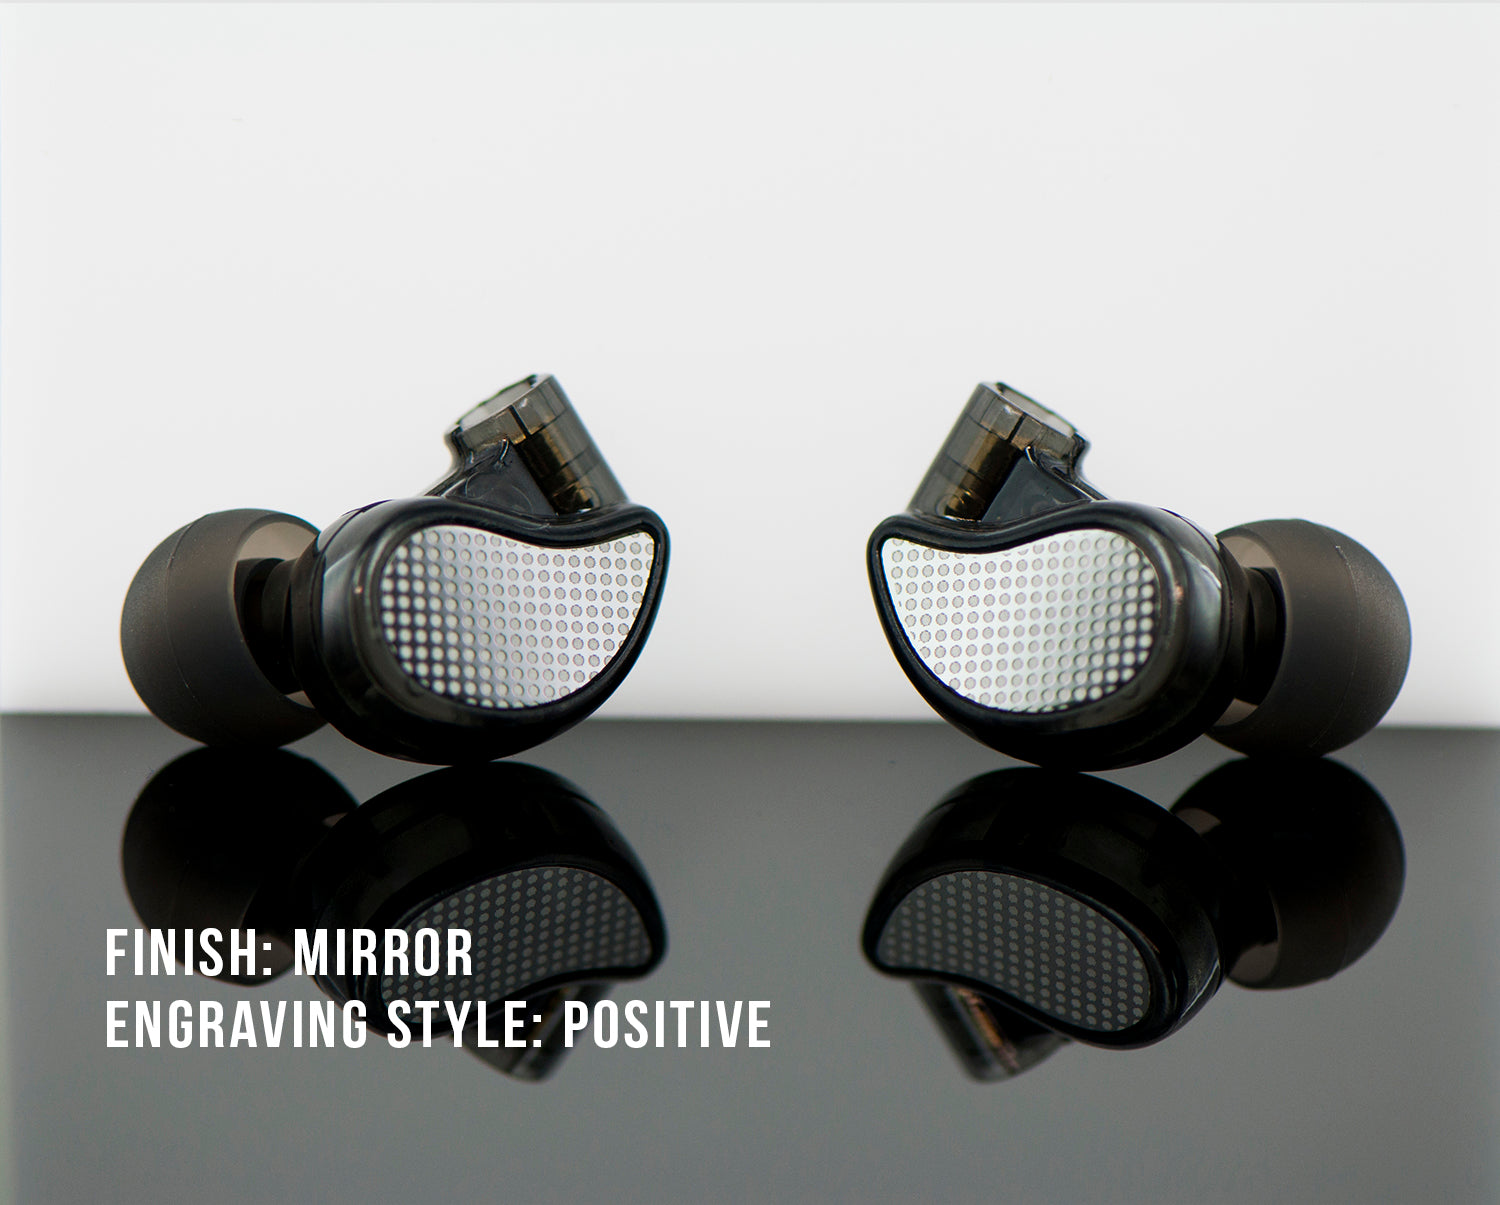 Two high-end in-ear headphones with a mirror finish and positive engraving style on their outer shells, reflected on a glossy surface, against a light grey background.